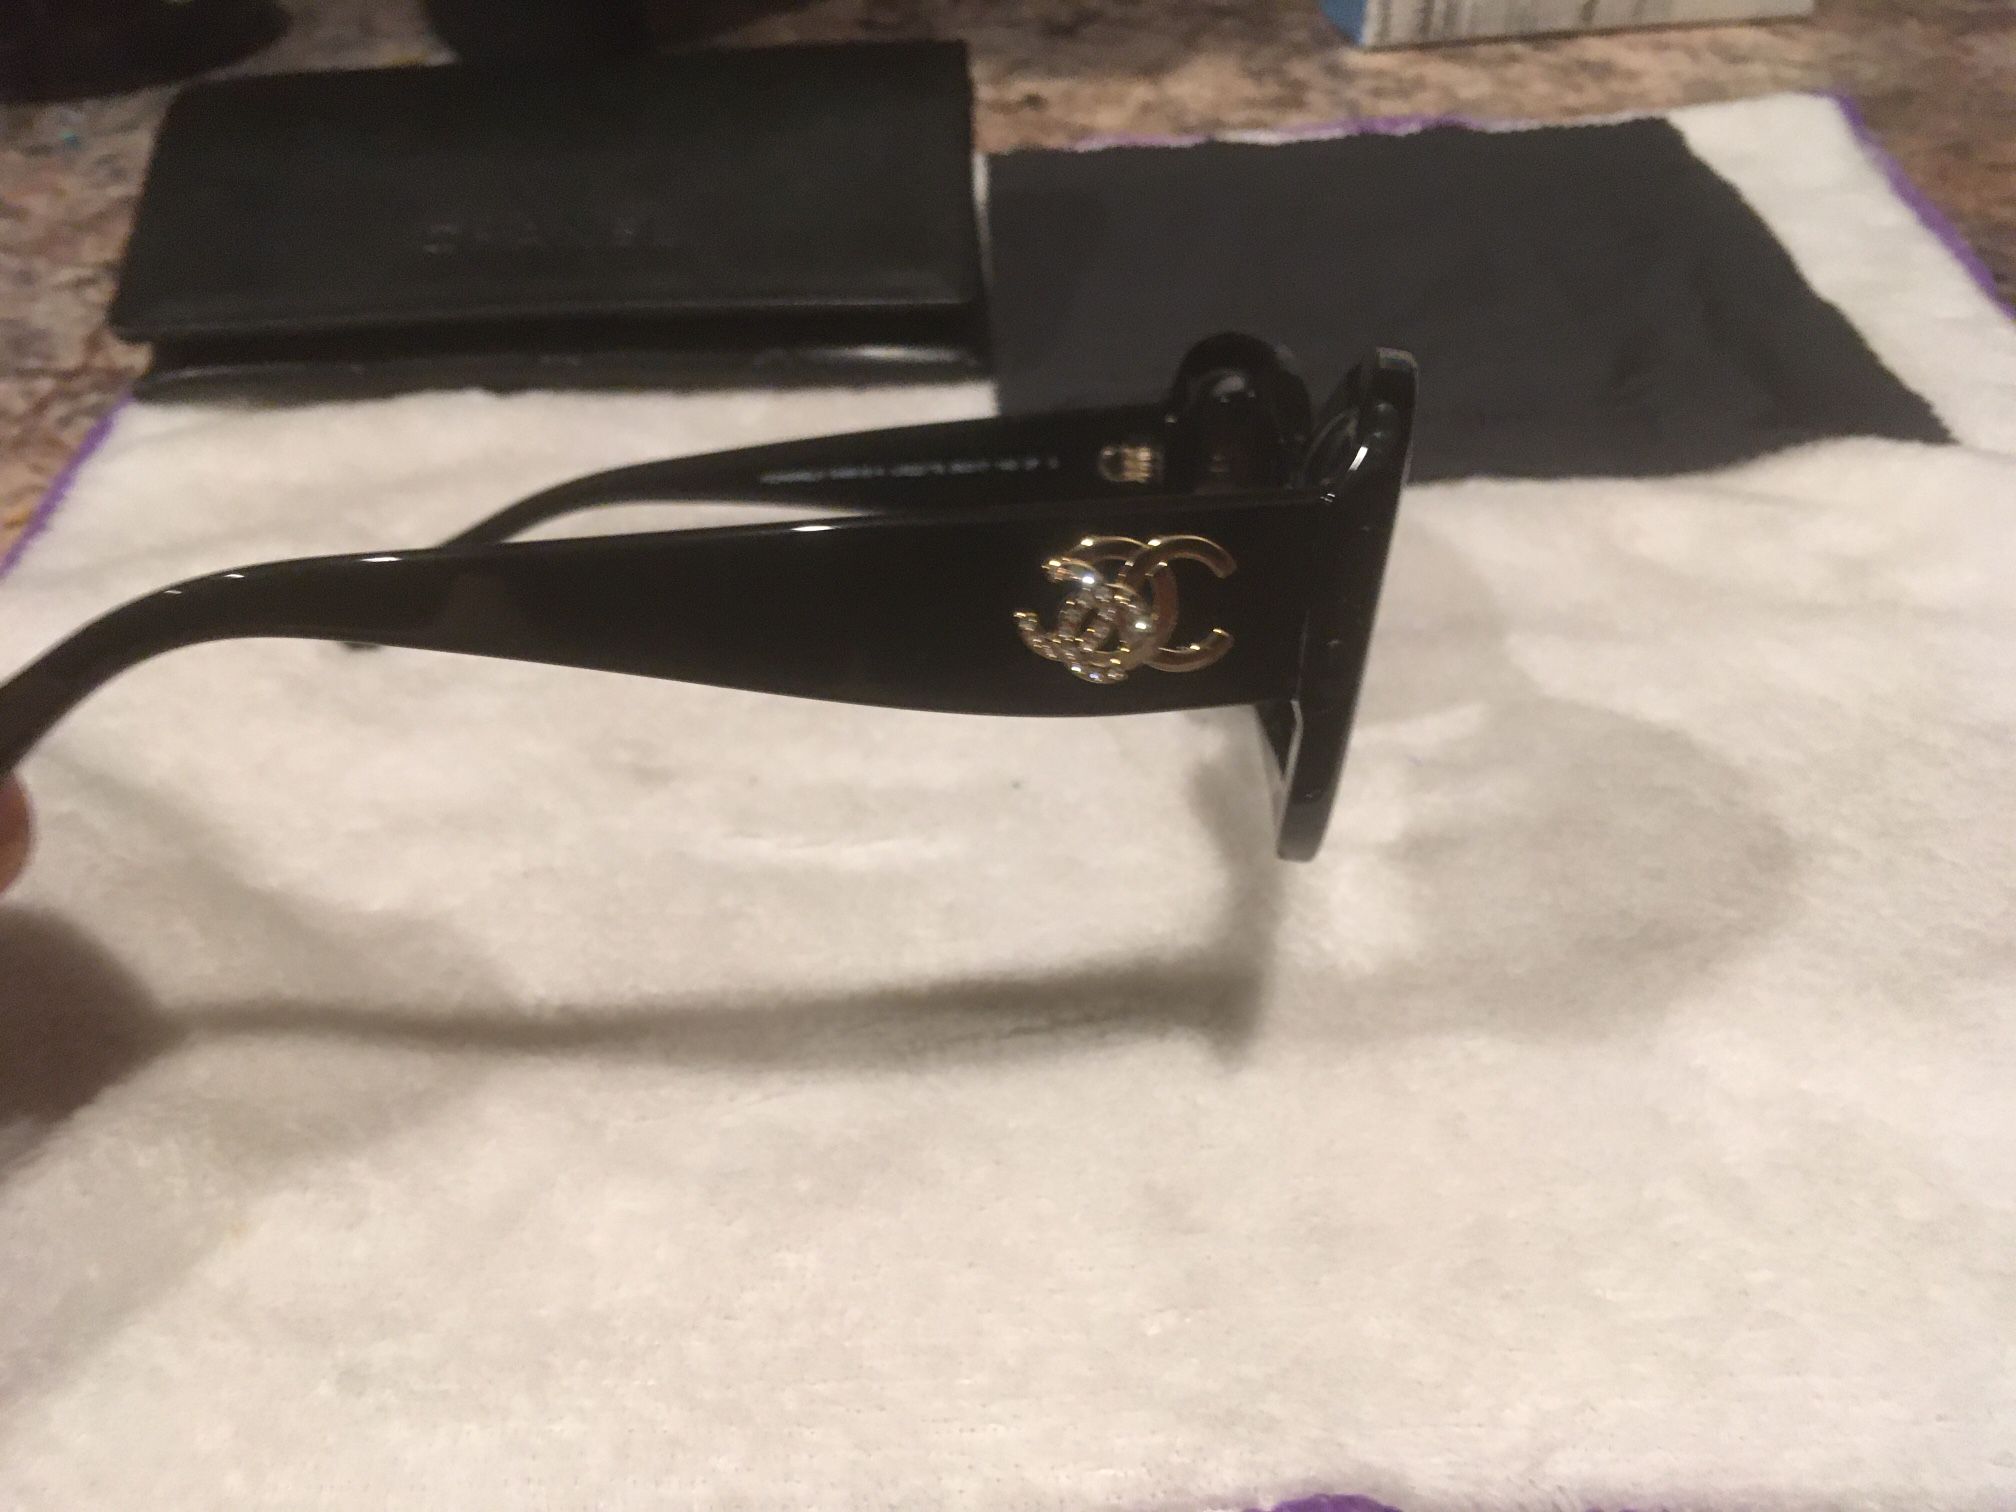 Chanel Sunglasses Black Frame Gold And Black Grips for Sale in Phoenix, AZ  - OfferUp